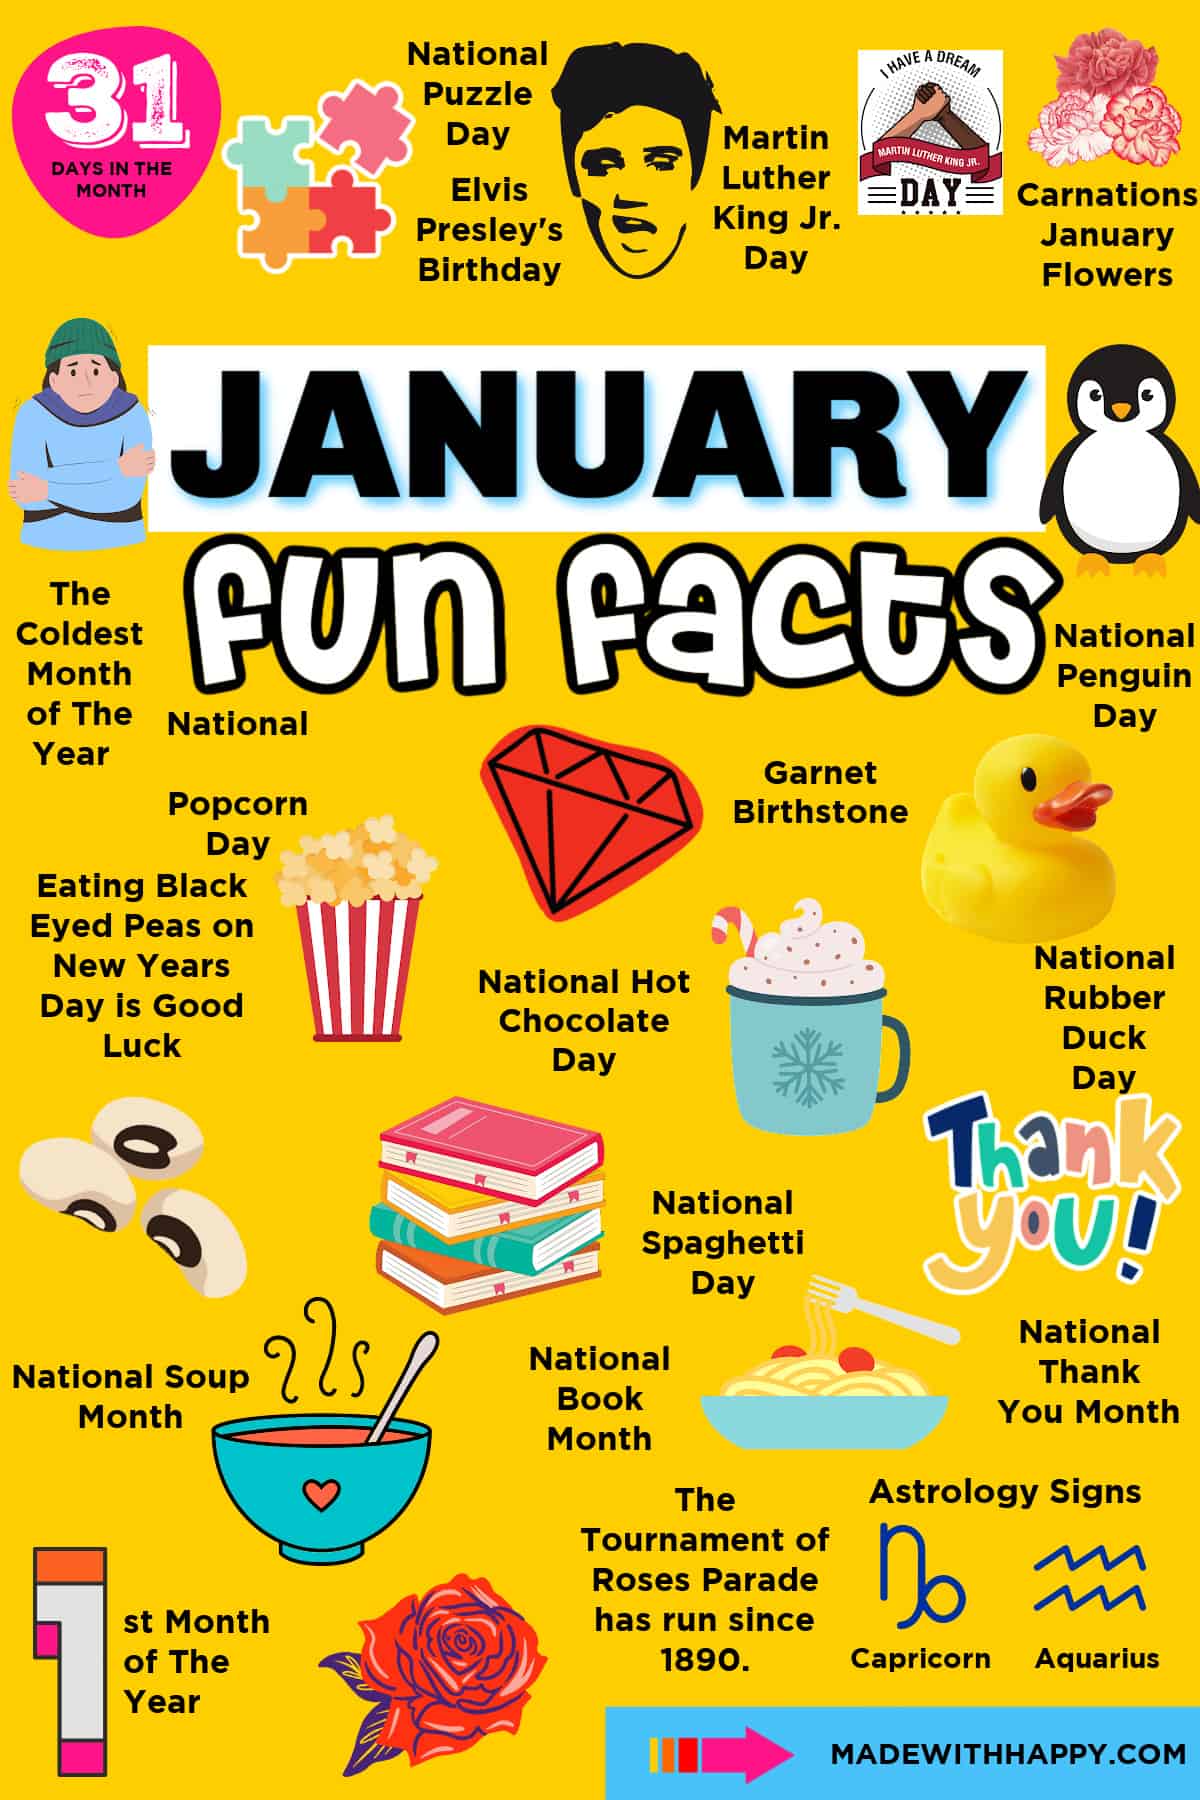 Fun Facts About January